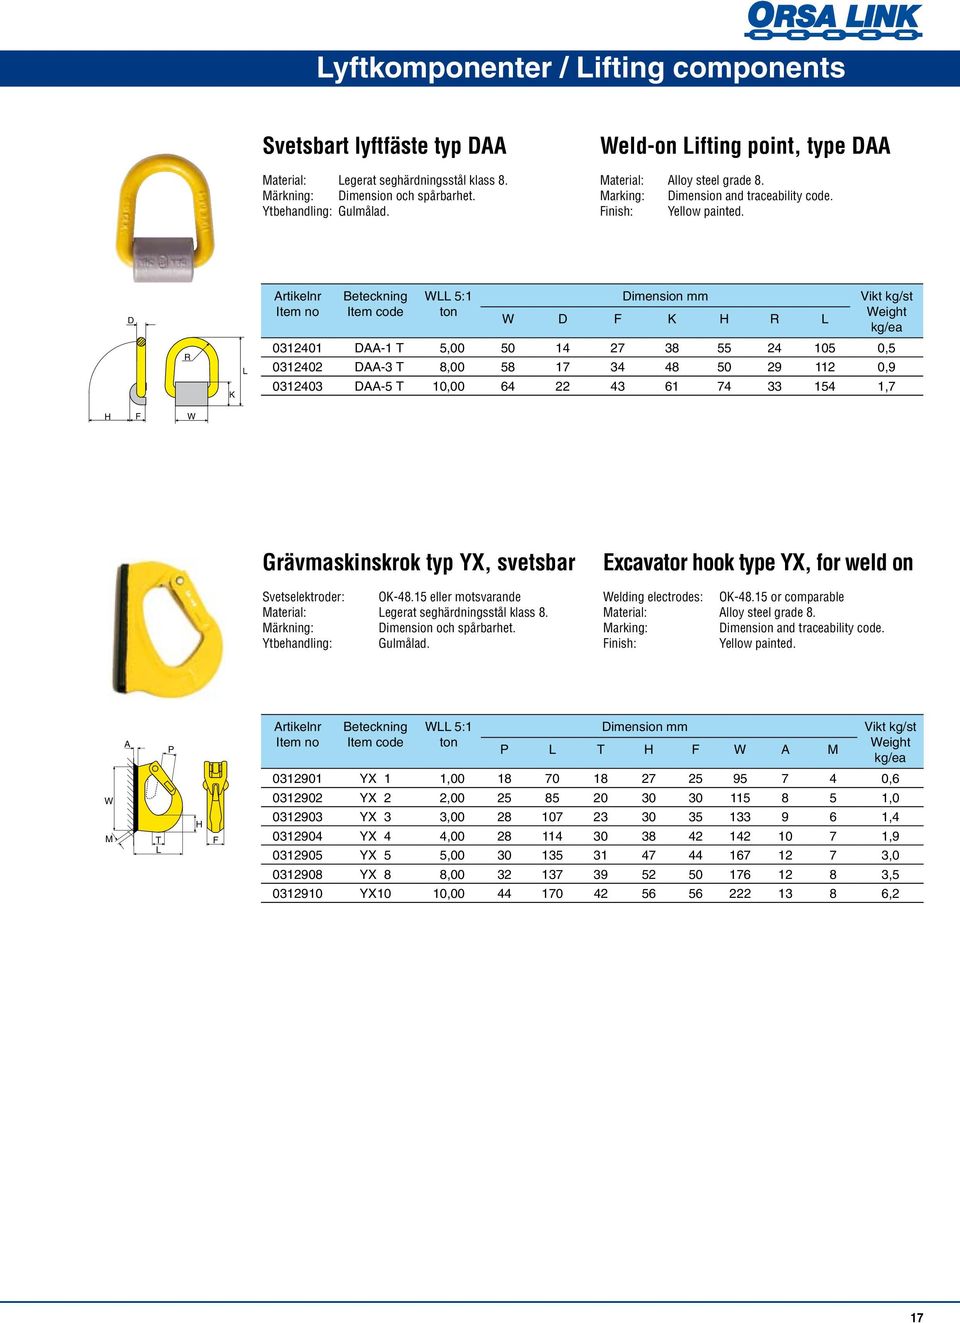 Excavator hook type YX, for weld on Welding electrodes: O-48.15 or comparable Marking: imension and traceability code. Finish: Yellow painted.